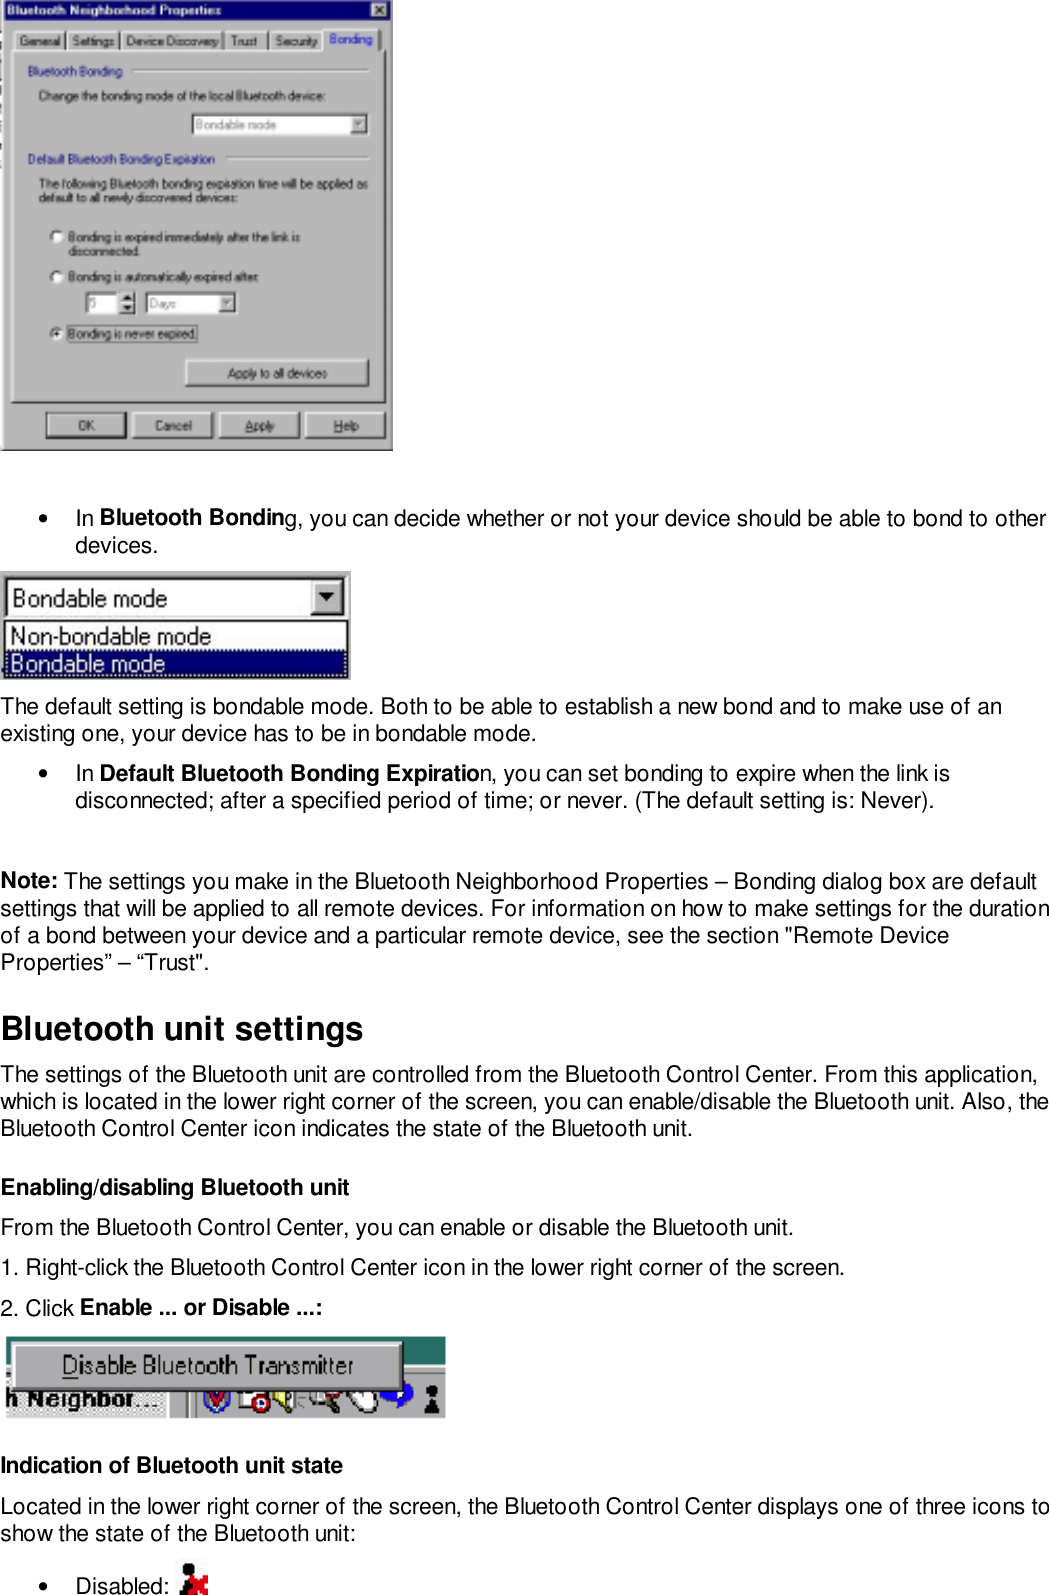 • In Bluetooth Bonding, you can decide whether or not your device should be able to bond to otherdevices.The default setting is bondable mode. Both to be able to establish a new bond and to make use of anexisting one, your device has to be in bondable mode.• In Default Bluetooth Bonding Expiration, you can set bonding to expire when the link isdisconnected; after a specified period of time; or never. (The default setting is: Never).Note: The settings you make in the Bluetooth Neighborhood Properties – Bonding dialog box are defaultsettings that will be applied to all remote devices. For information on how to make settings for the durationof a bond between your device and a particular remote device, see the section &quot;Remote DeviceProperties” – “Trust&quot;.Bluetooth unit settingsThe settings of the Bluetooth unit are controlled from the Bluetooth Control Center. From this application,which is located in the lower right corner of the screen, you can enable/disable the Bluetooth unit. Also, theBluetooth Control Center icon indicates the state of the Bluetooth unit.Enabling/disabling Bluetooth unitFrom the Bluetooth Control Center, you can enable or disable the Bluetooth unit.1. Right-click the Bluetooth Control Center icon in the lower right corner of the screen.2. Click Enable ... or Disable ...:Indication of Bluetooth unit stateLocated in the lower right corner of the screen, the Bluetooth Control Center displays one of three icons toshow the state of the Bluetooth unit:• Disabled: 